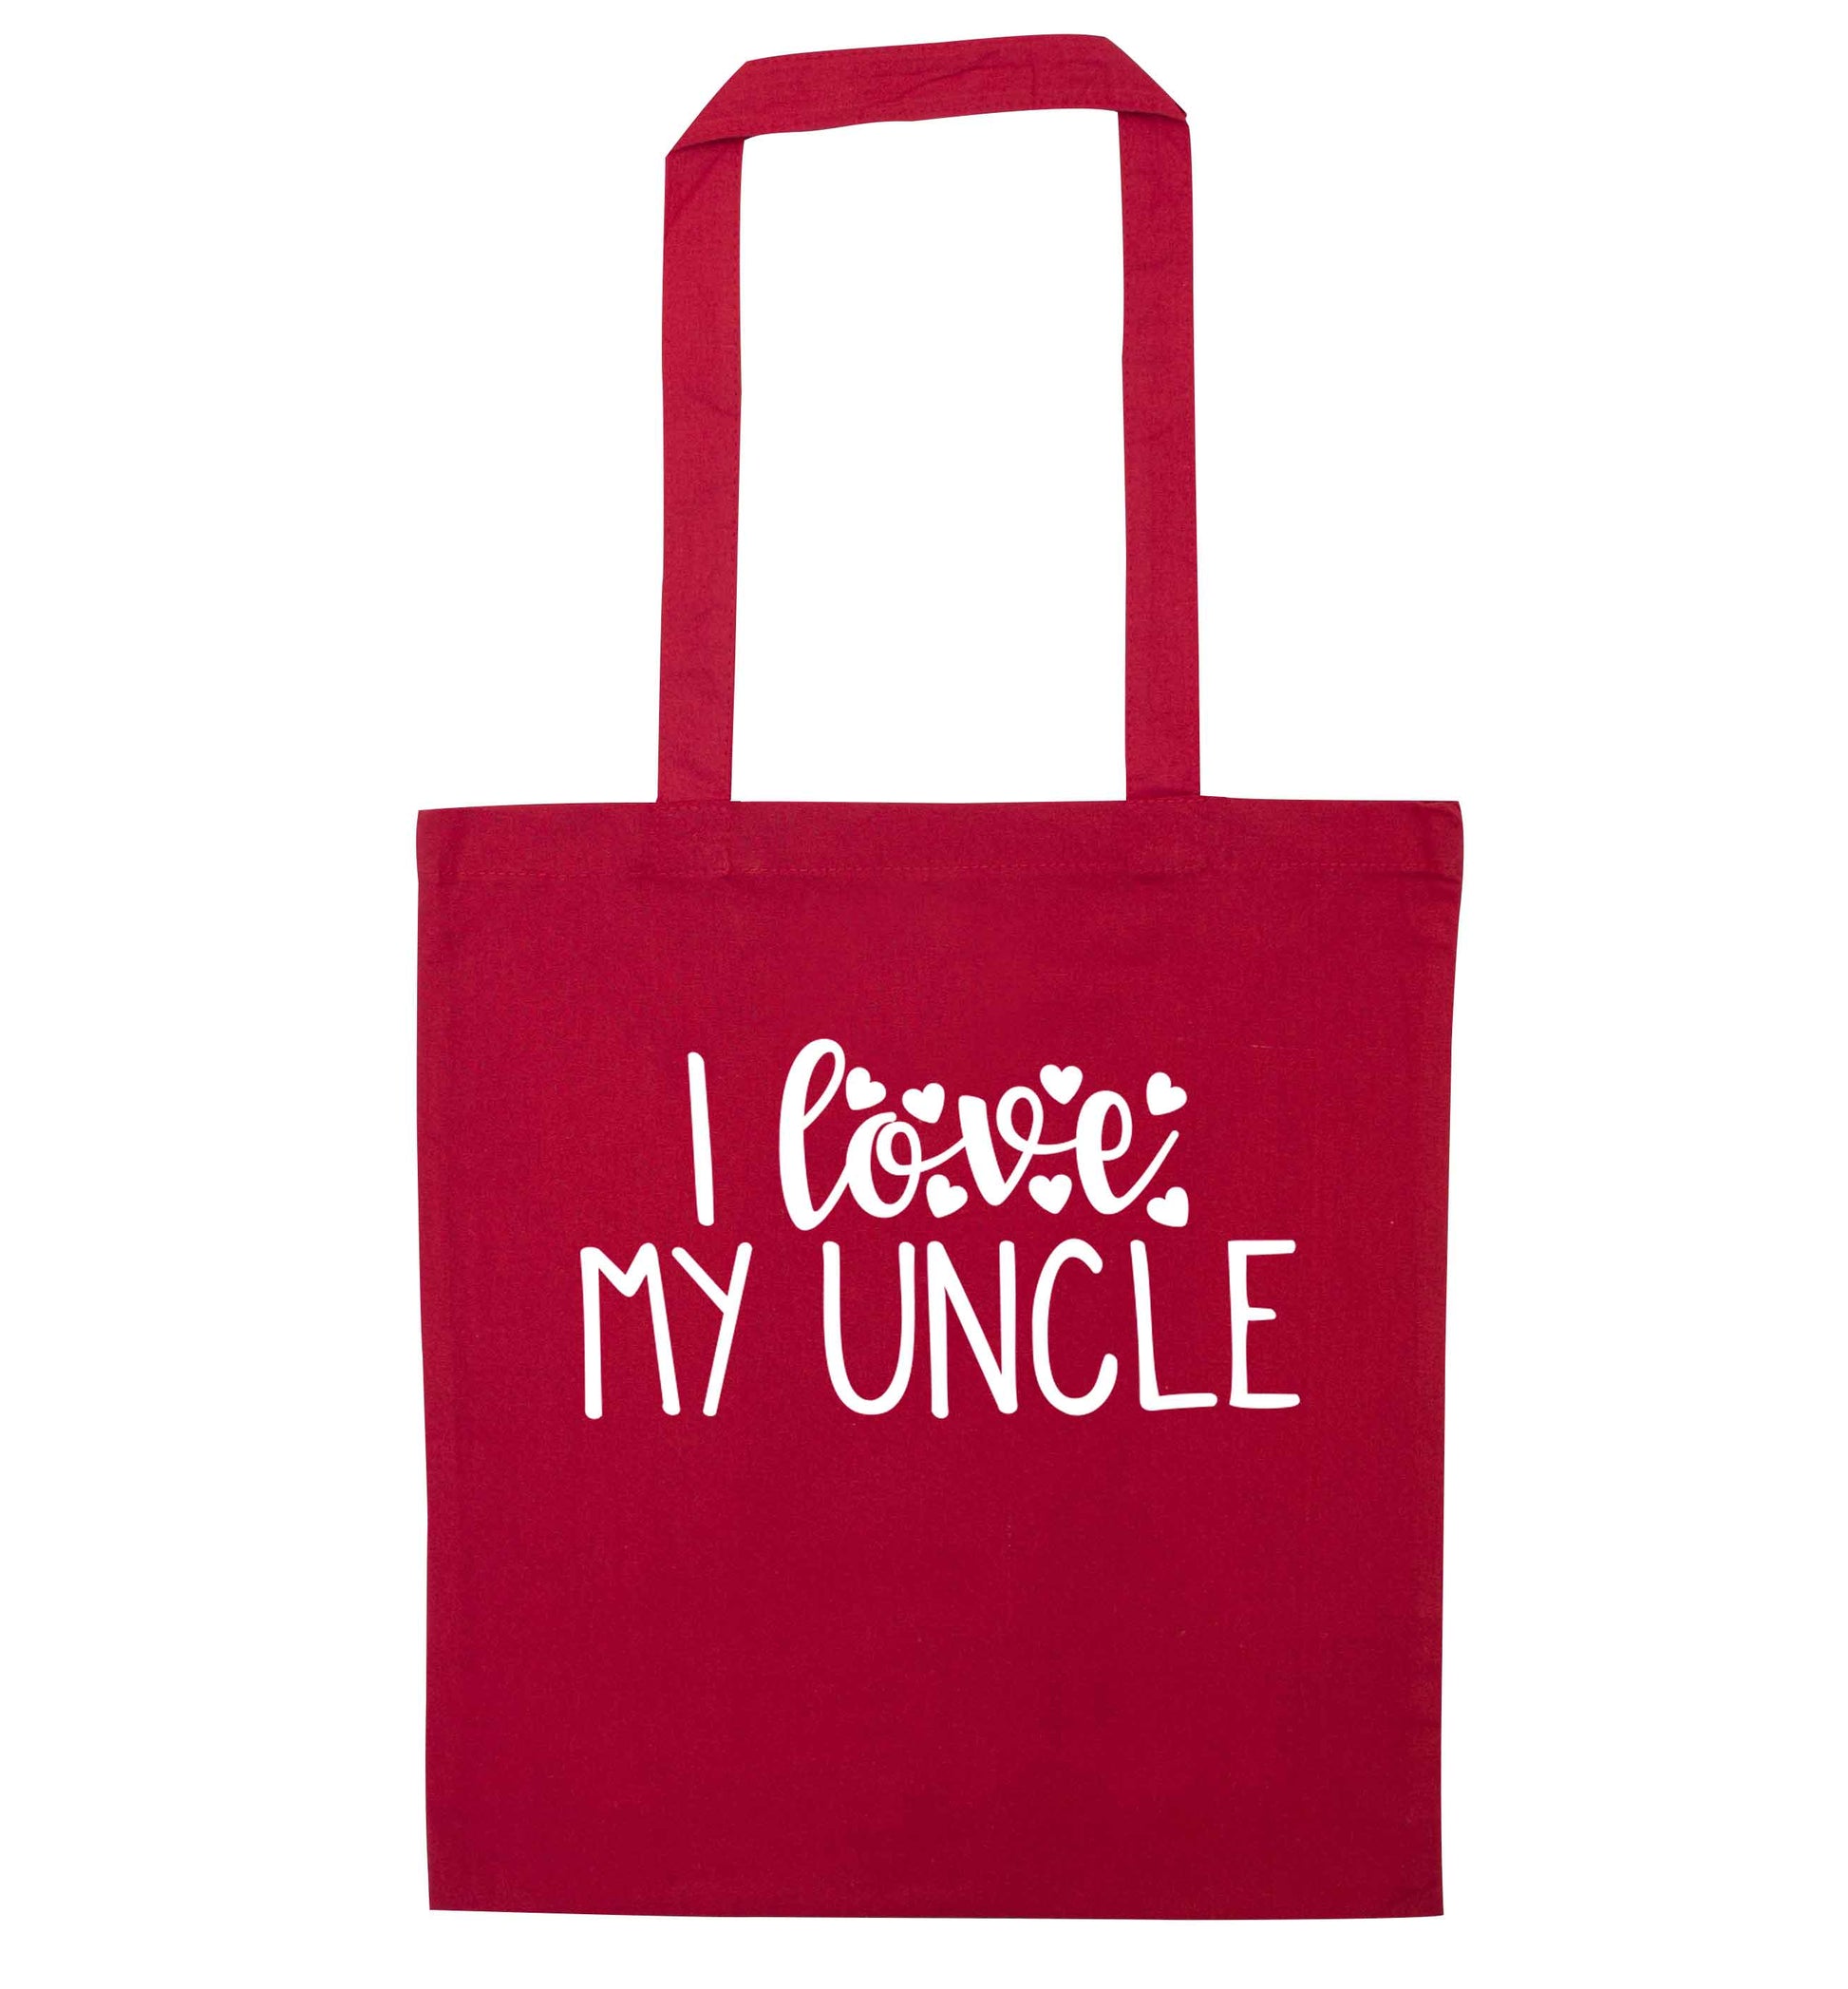 I love my uncle red tote bag